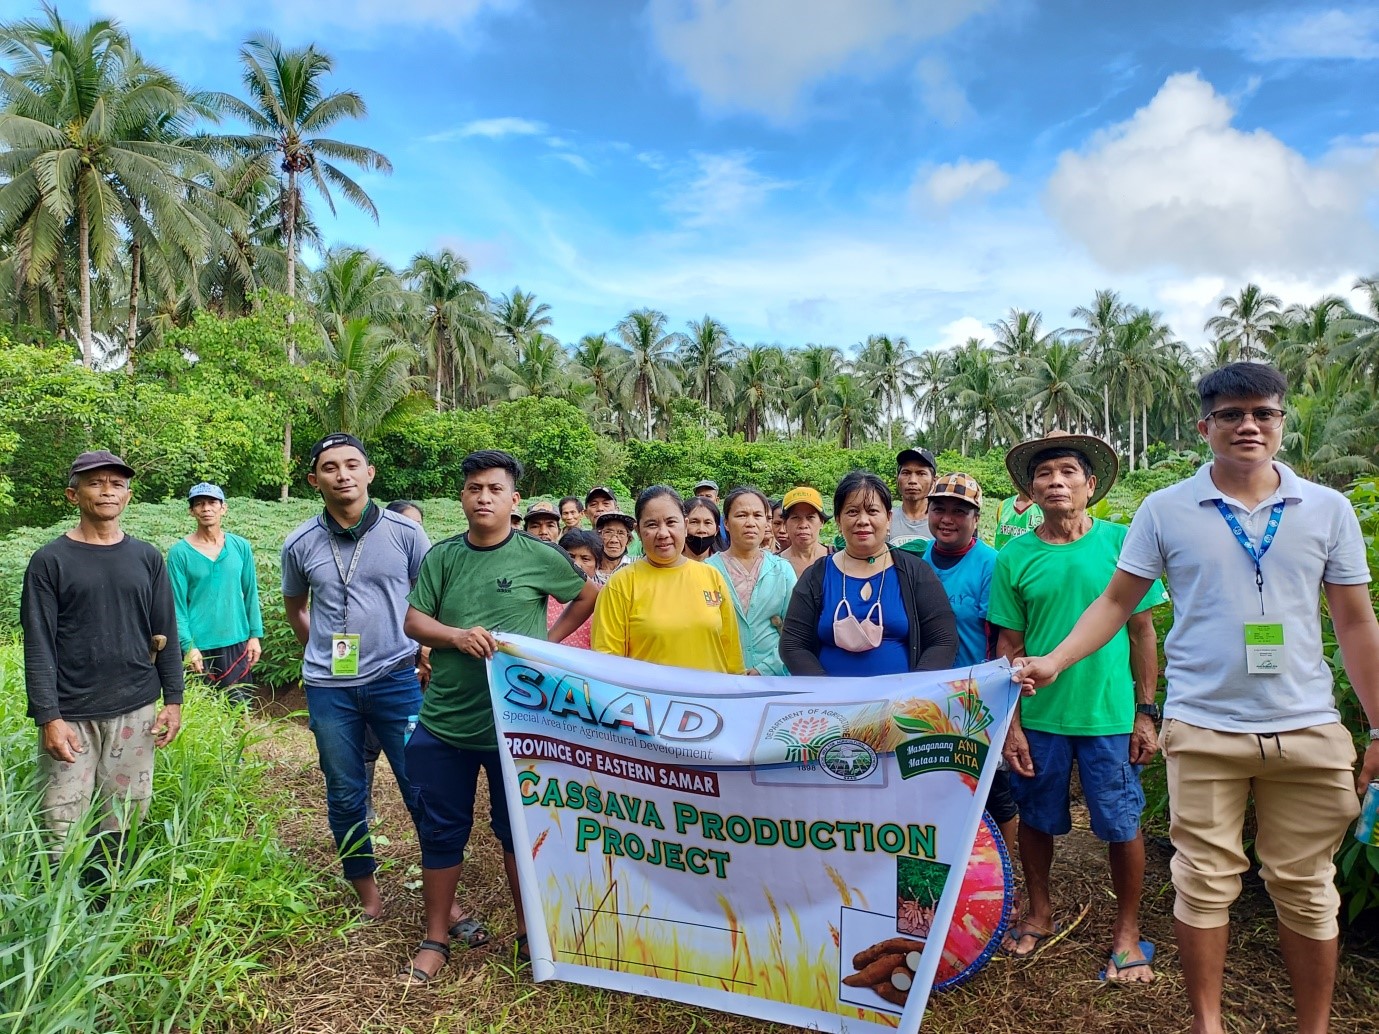 Cassava Production Project benefits 3 FAs in Eastern Samar